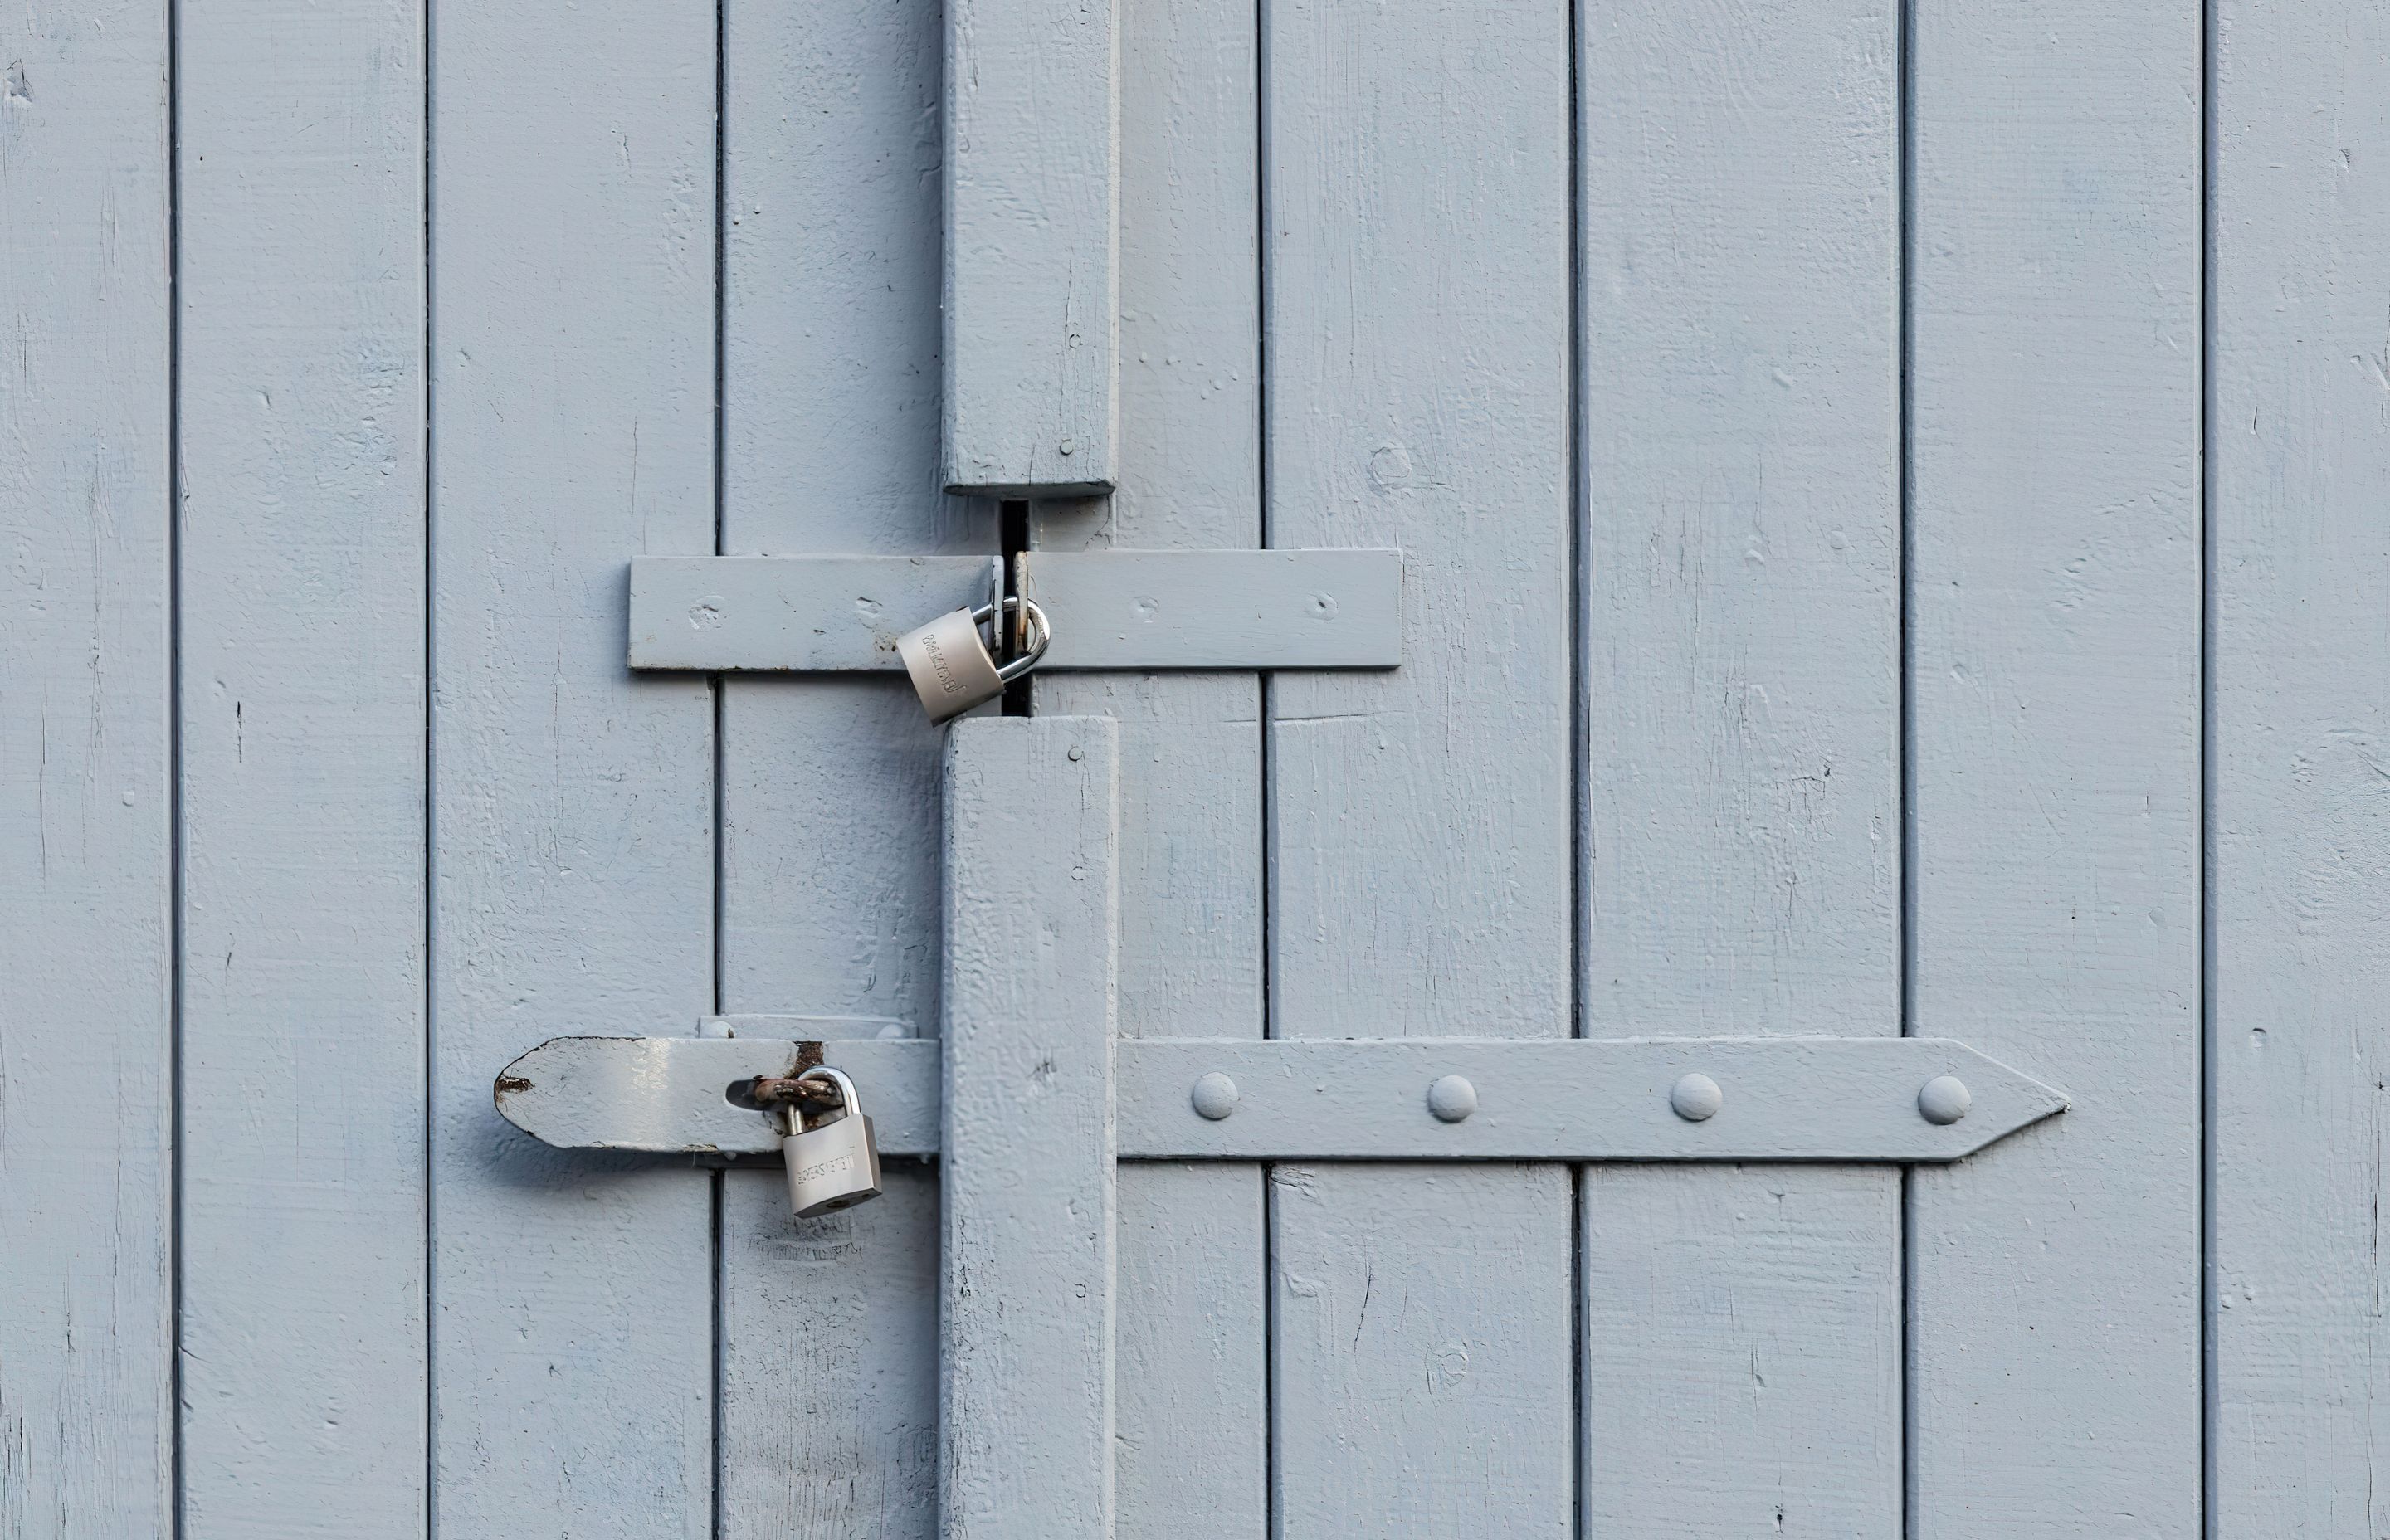 How to secure your garage the right way